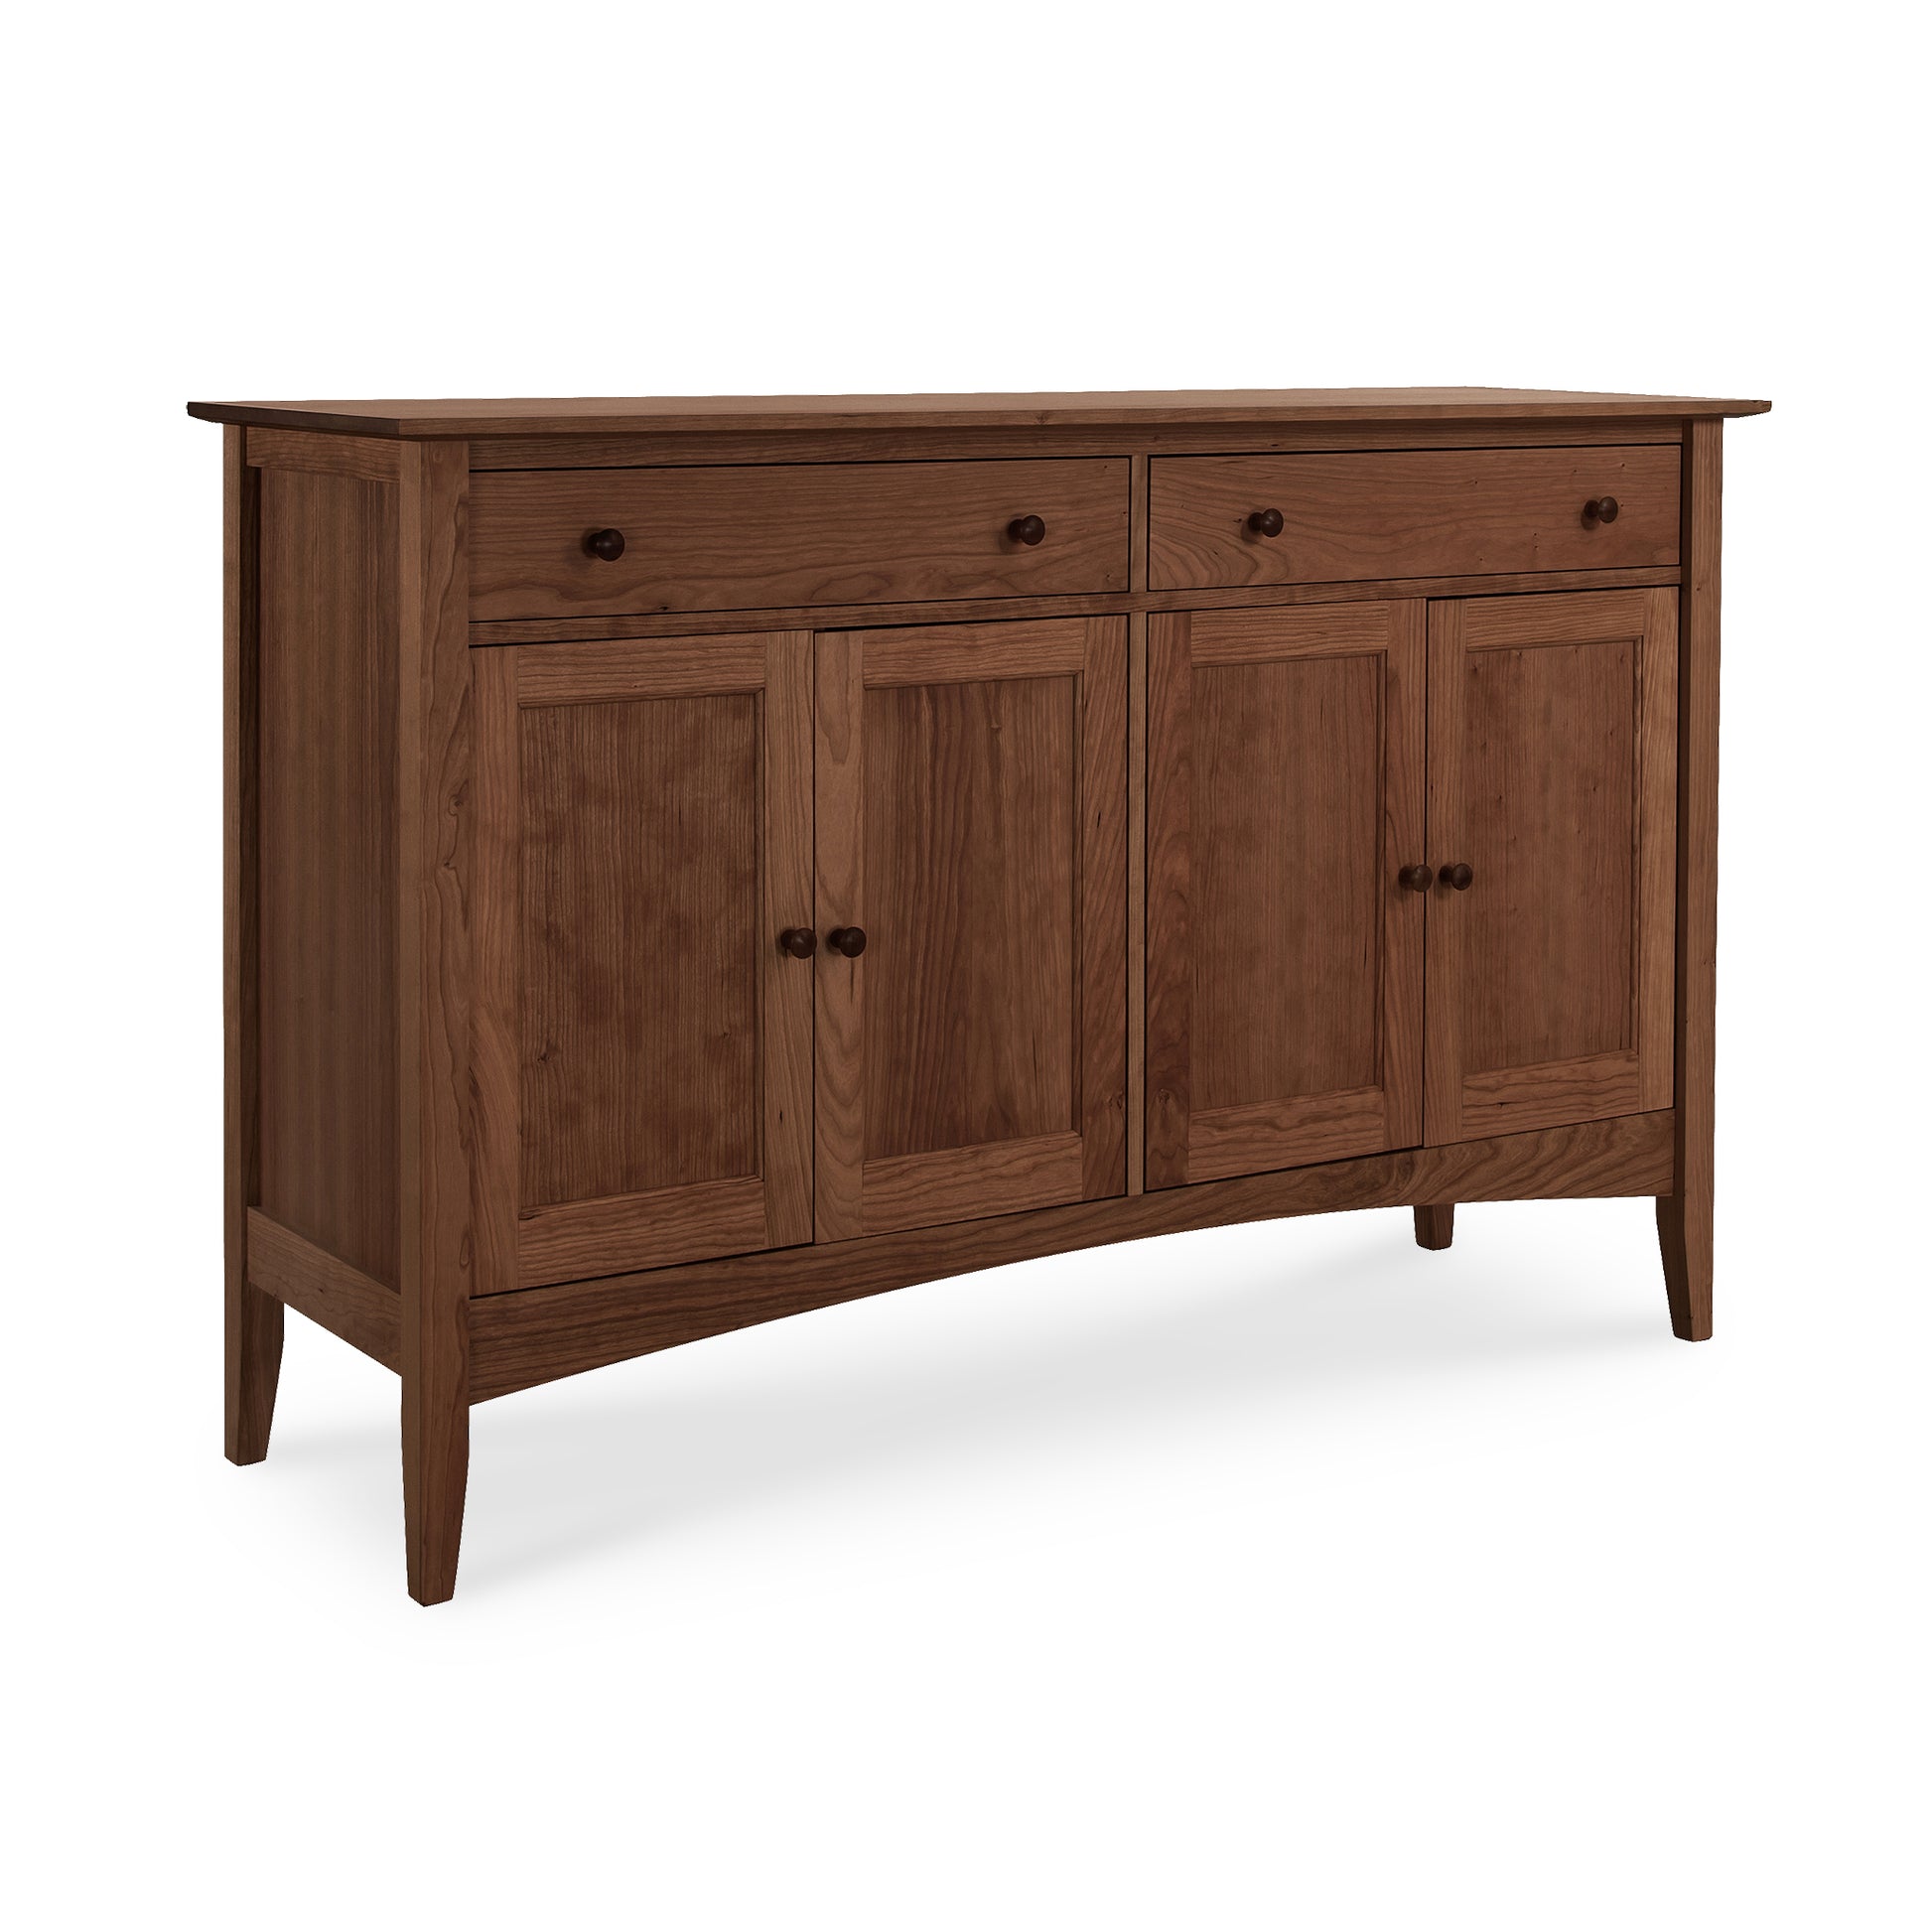 A Maple Corner Woodworks American Shaker Sideboard with three drawers and three cabinet doors, set against a white background. The furniture, exemplifying Vermont craftsmanship, features a traditional design with a dark brown finish.